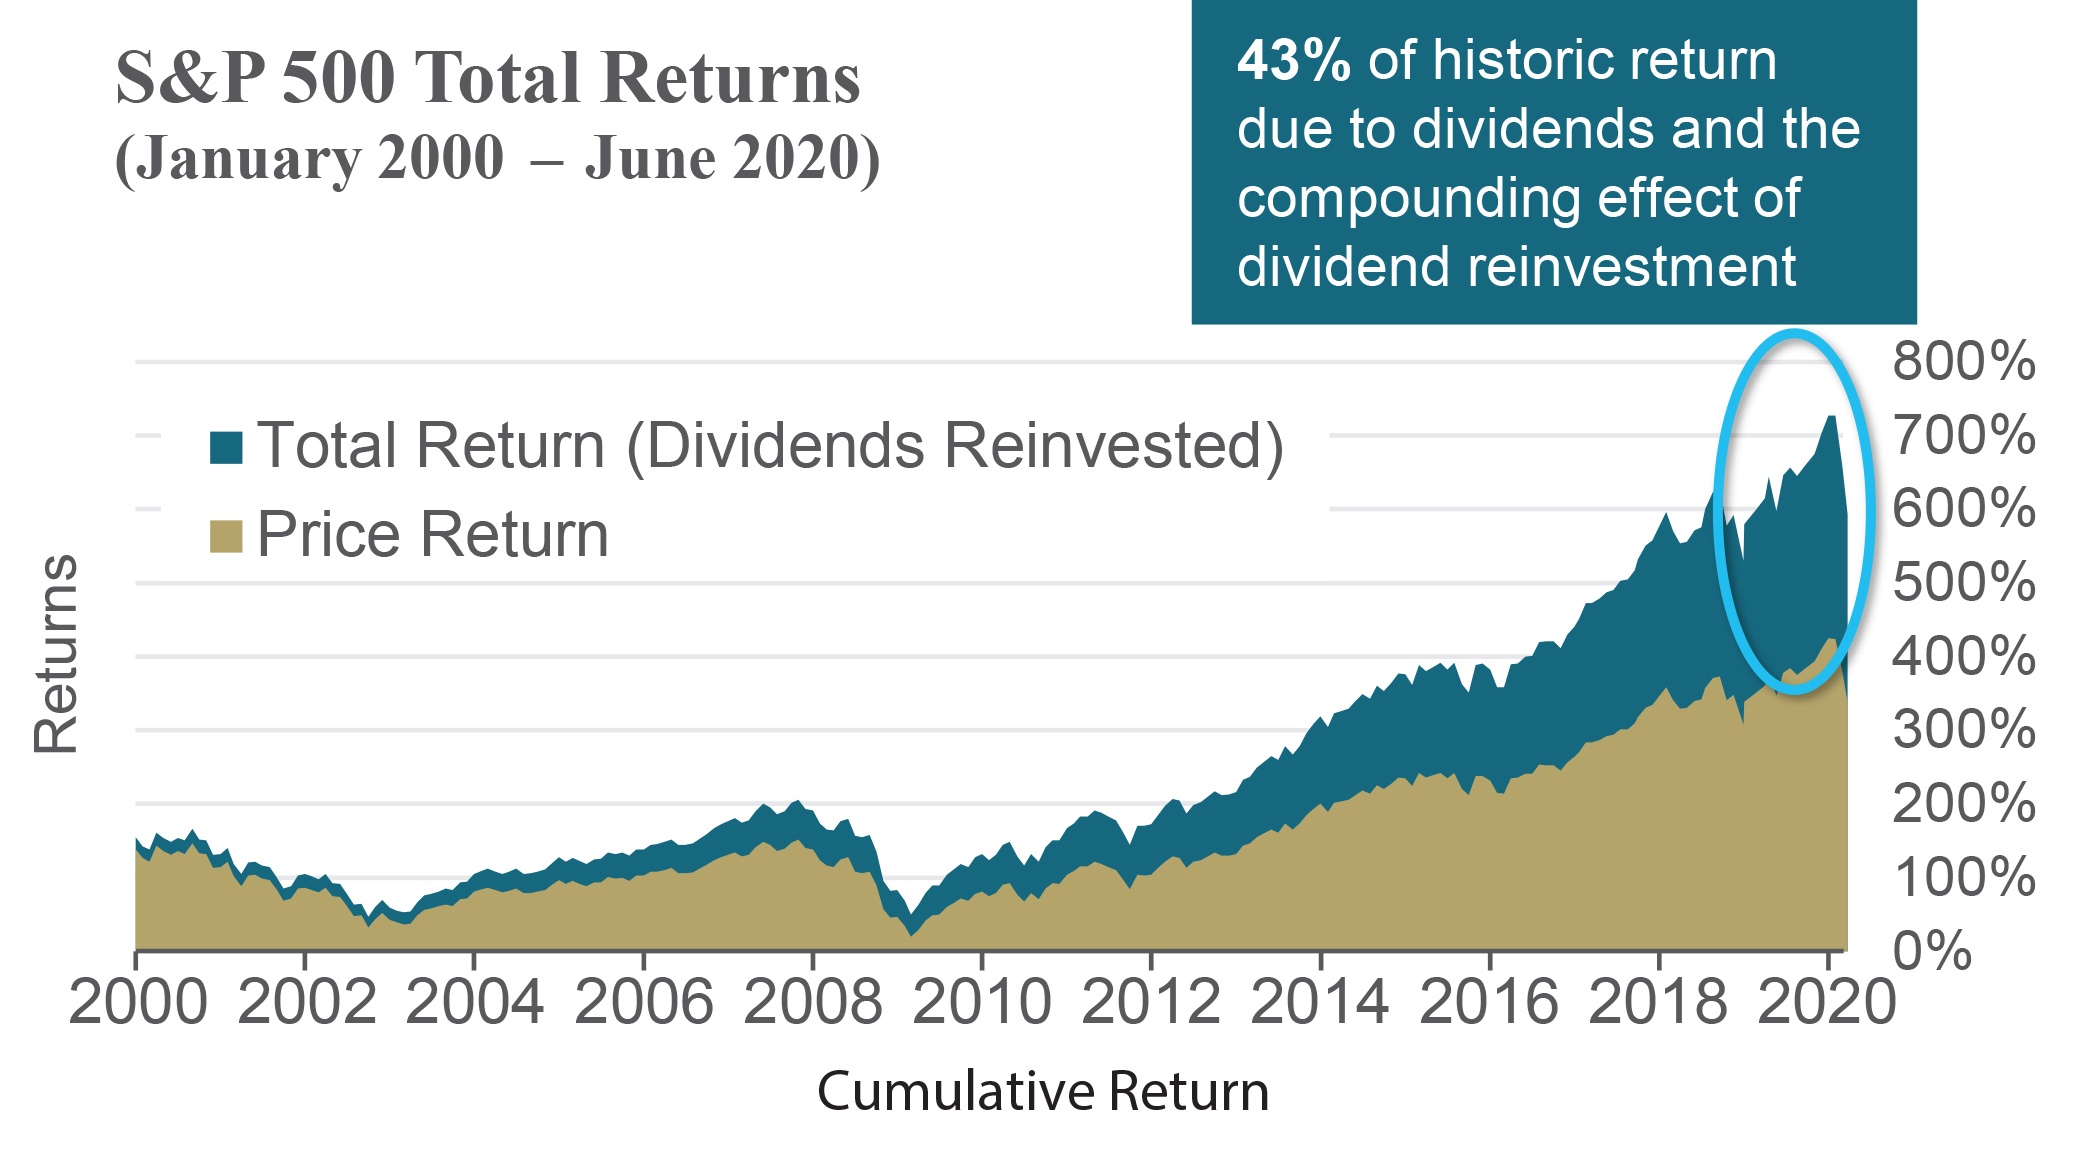 How Important is Dividend Reinvestment?